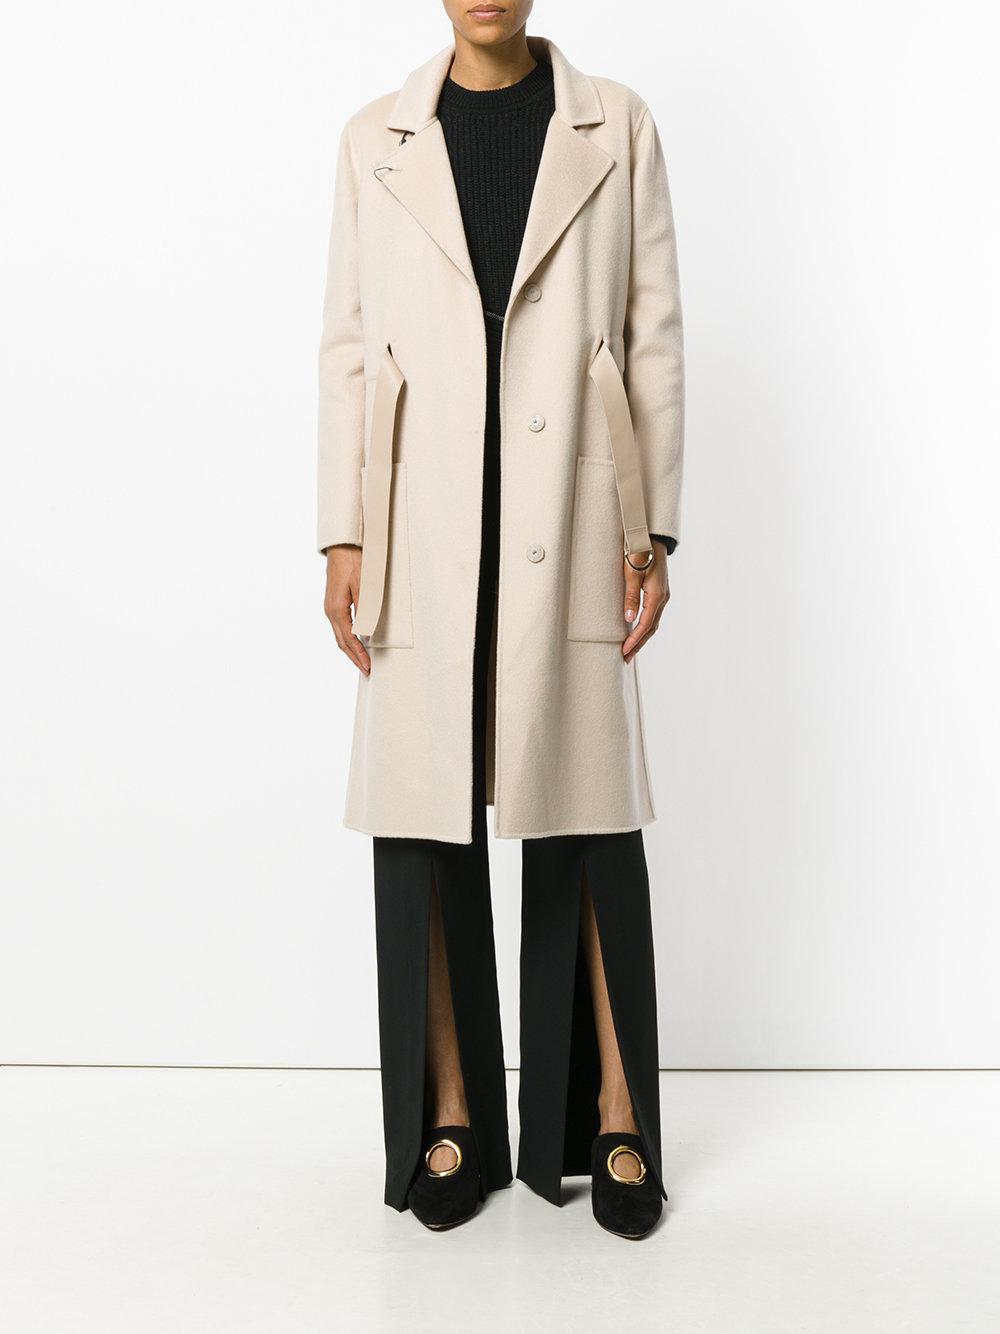 Lyst - Emporio Armani Belted Coat in Natural